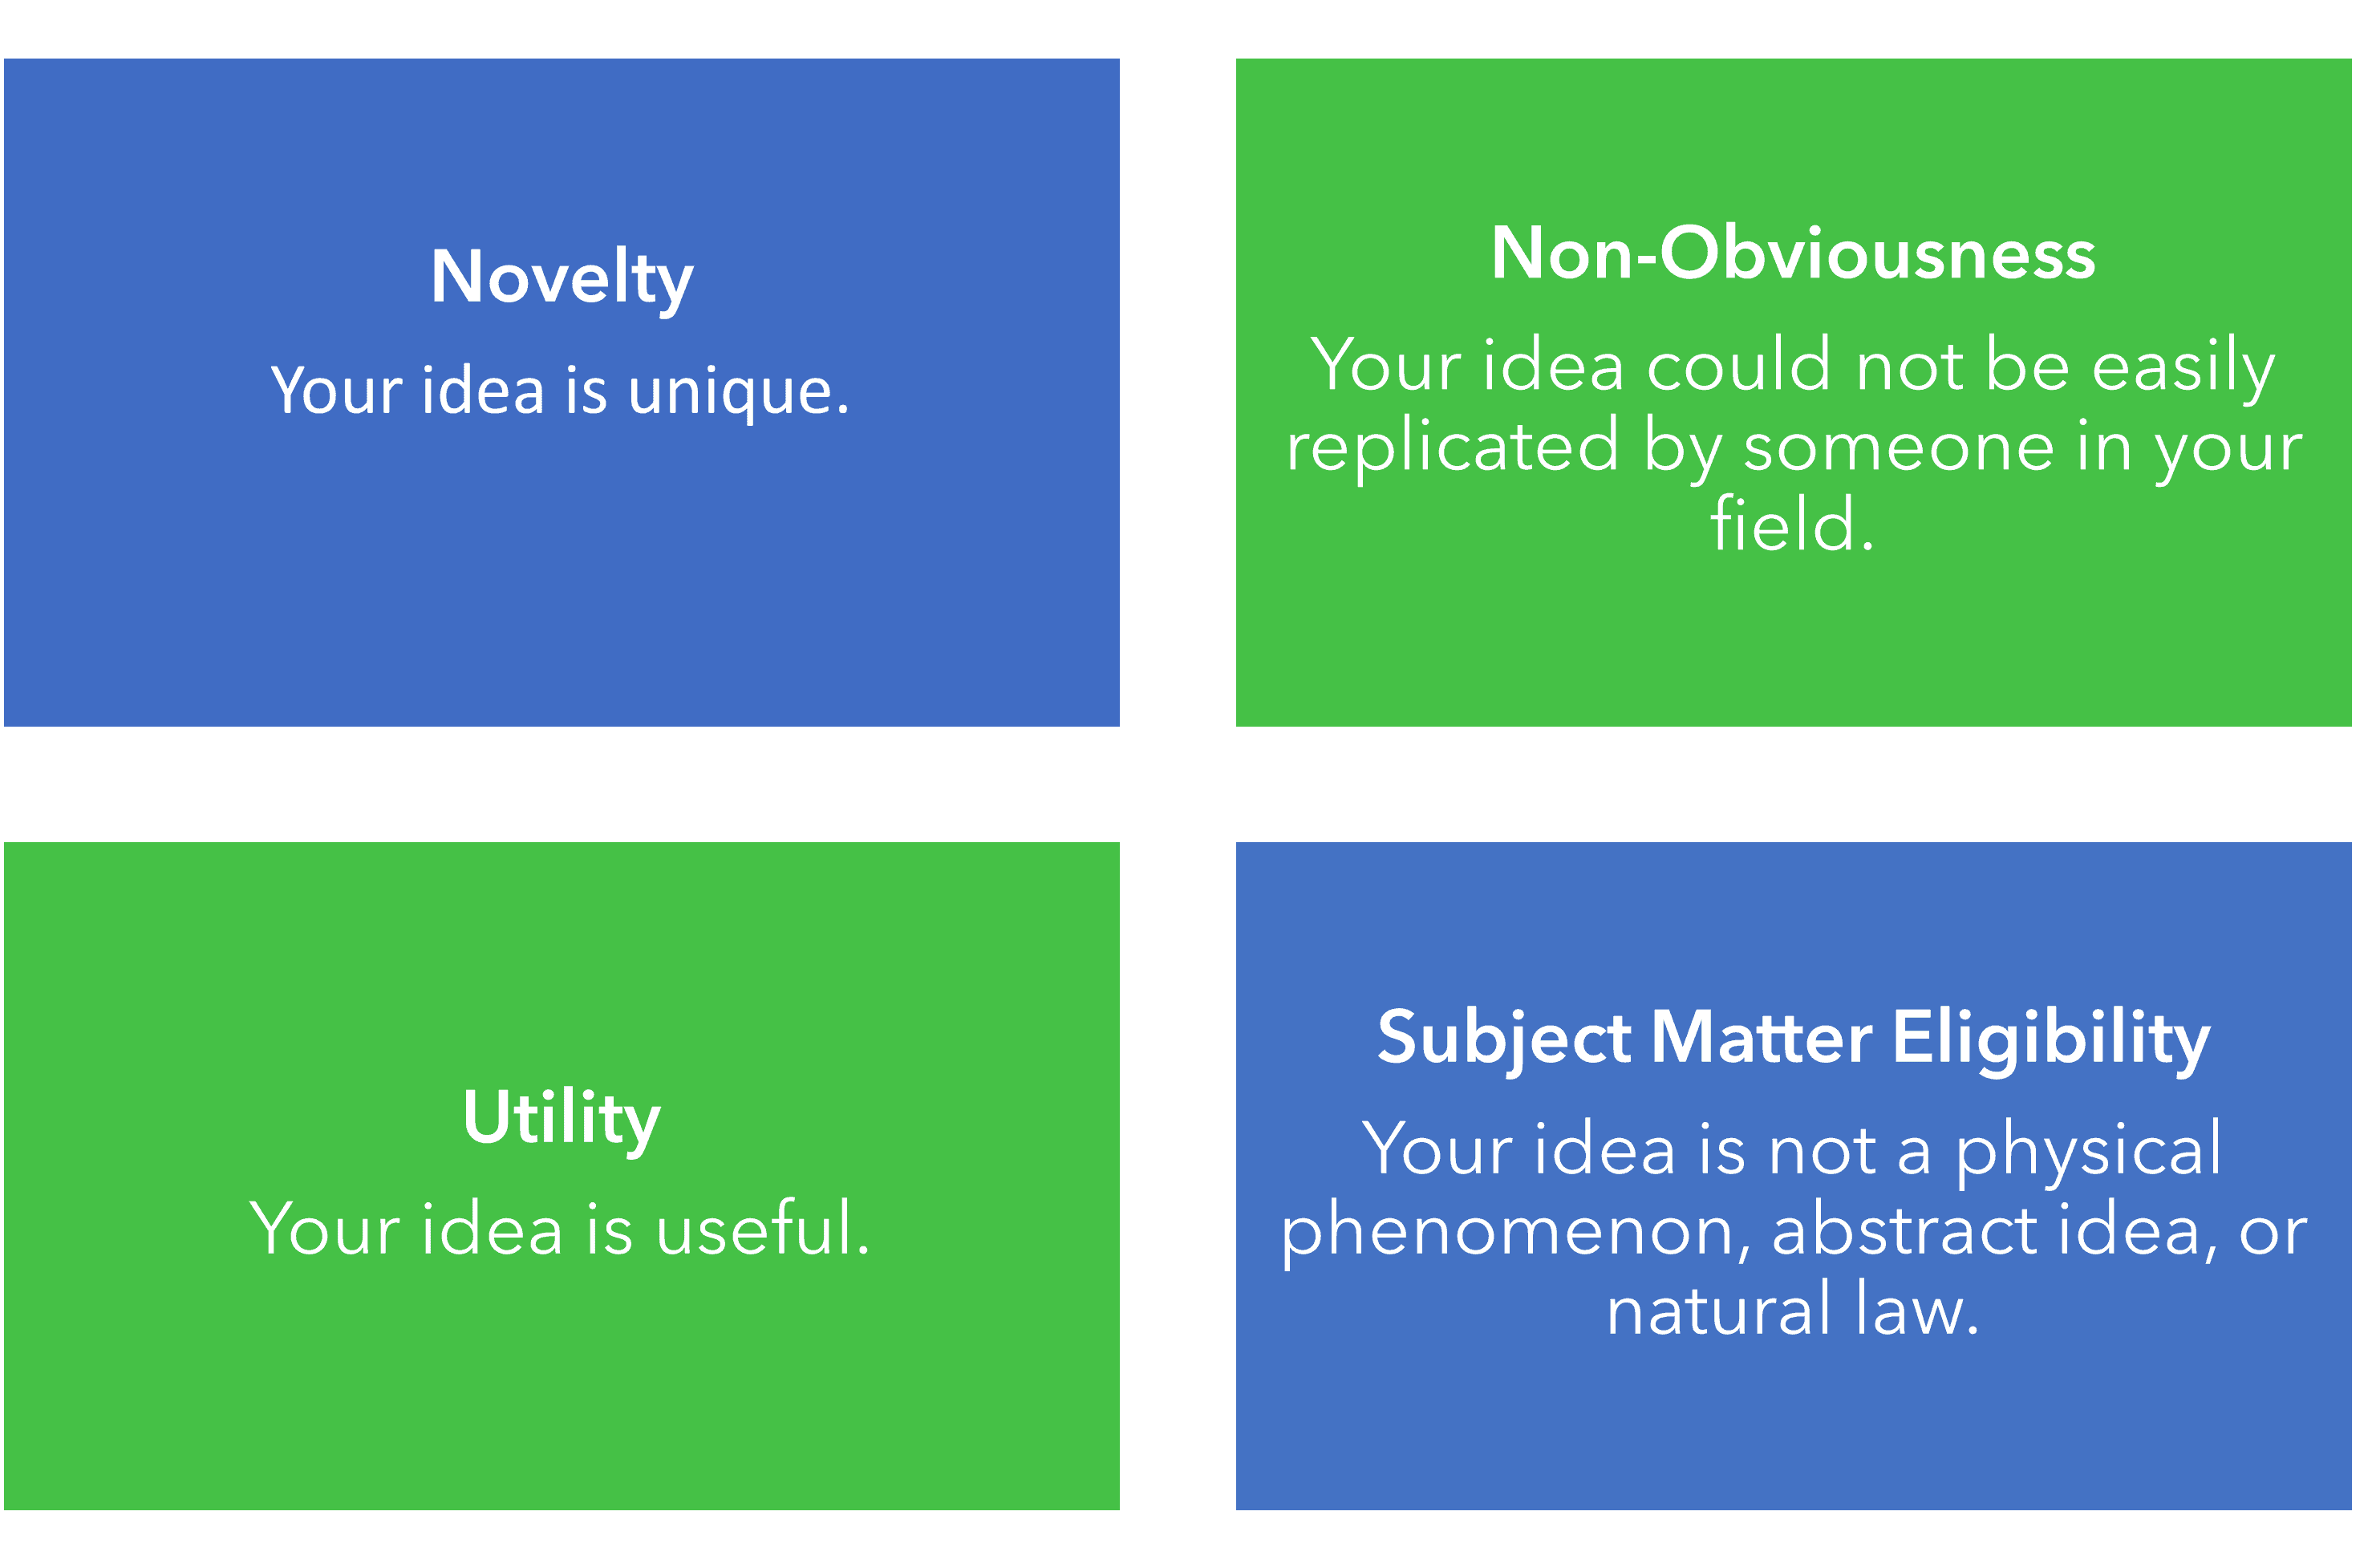 Novelty Your idea is unique; Non-obviousness Your idea could not be easily replicated by someone in your field.; Subject Matter Eligibility Your idea is not a physical phenomenon, abstract idea, or natural law.; Utility Your idea is useful.